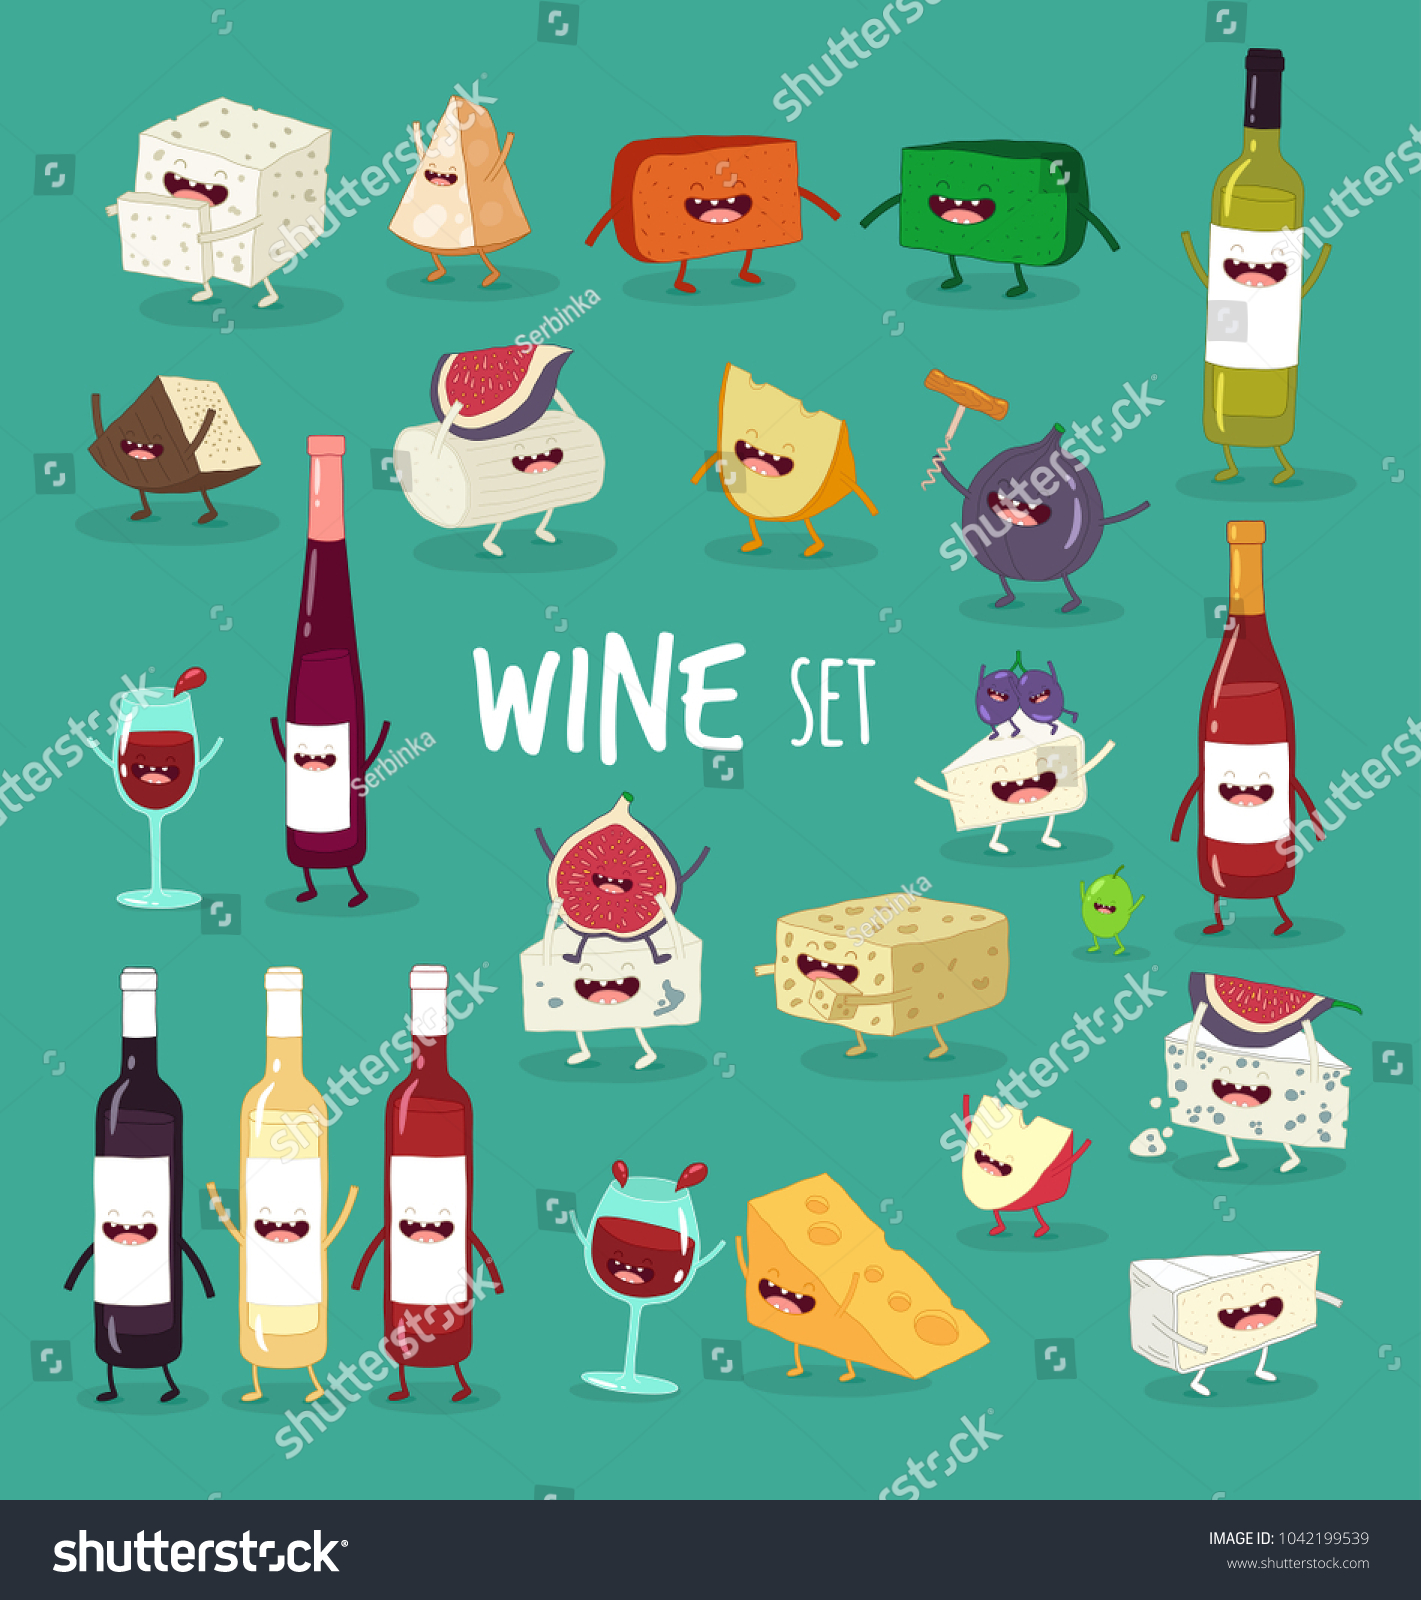 SVG of Wine bottle, glass wine, funny cheese, camembert, brie, blue, red wine, white wine, figs, grapes, corkscrew. Vector illustration. Alcohol bottles and cheese cartoon characters. Use for the menu. svg